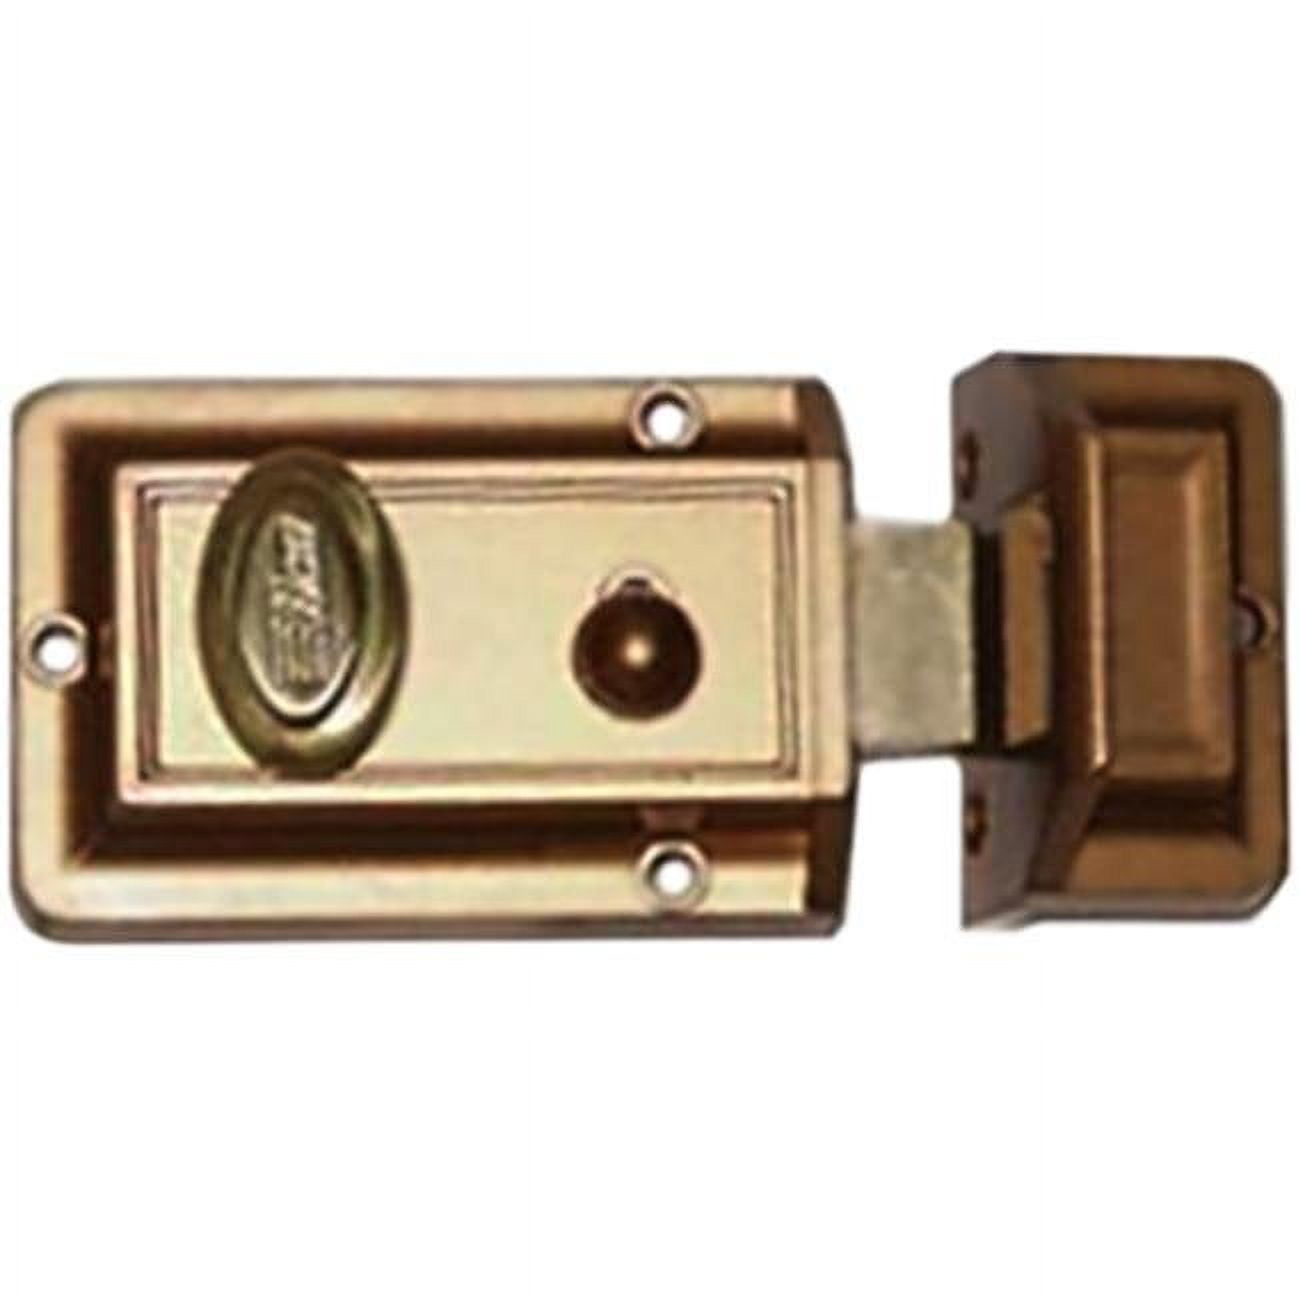 UPC 036448000166 product image for 530-53-51 Jimmy Proof Single Dead Lock, Bronze Lacquered | upcitemdb.com